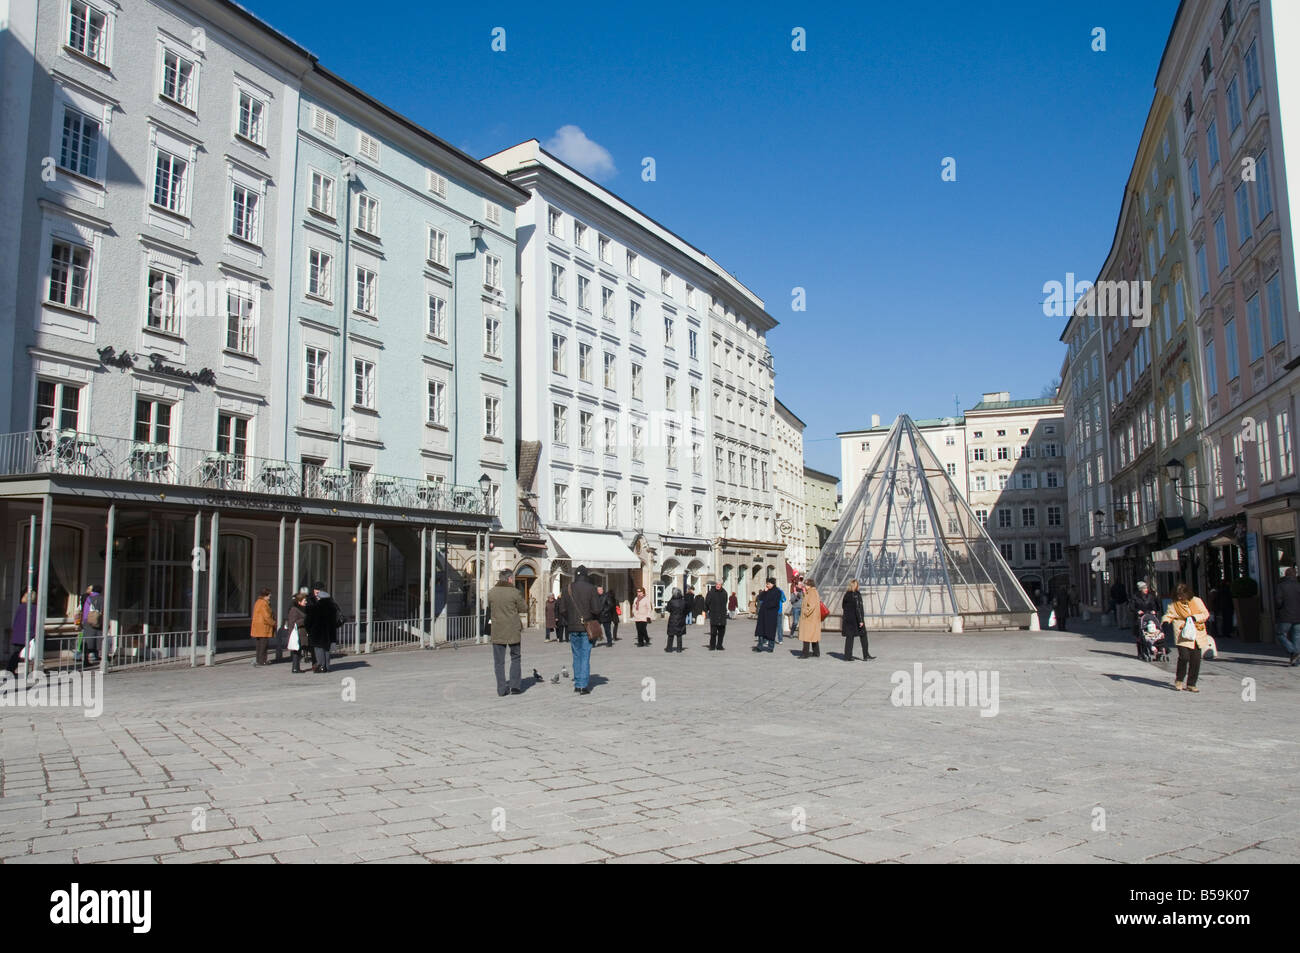 The Alter Markt, a square famous for its good shops, Salzburg, Austria, Europe Stock Photo